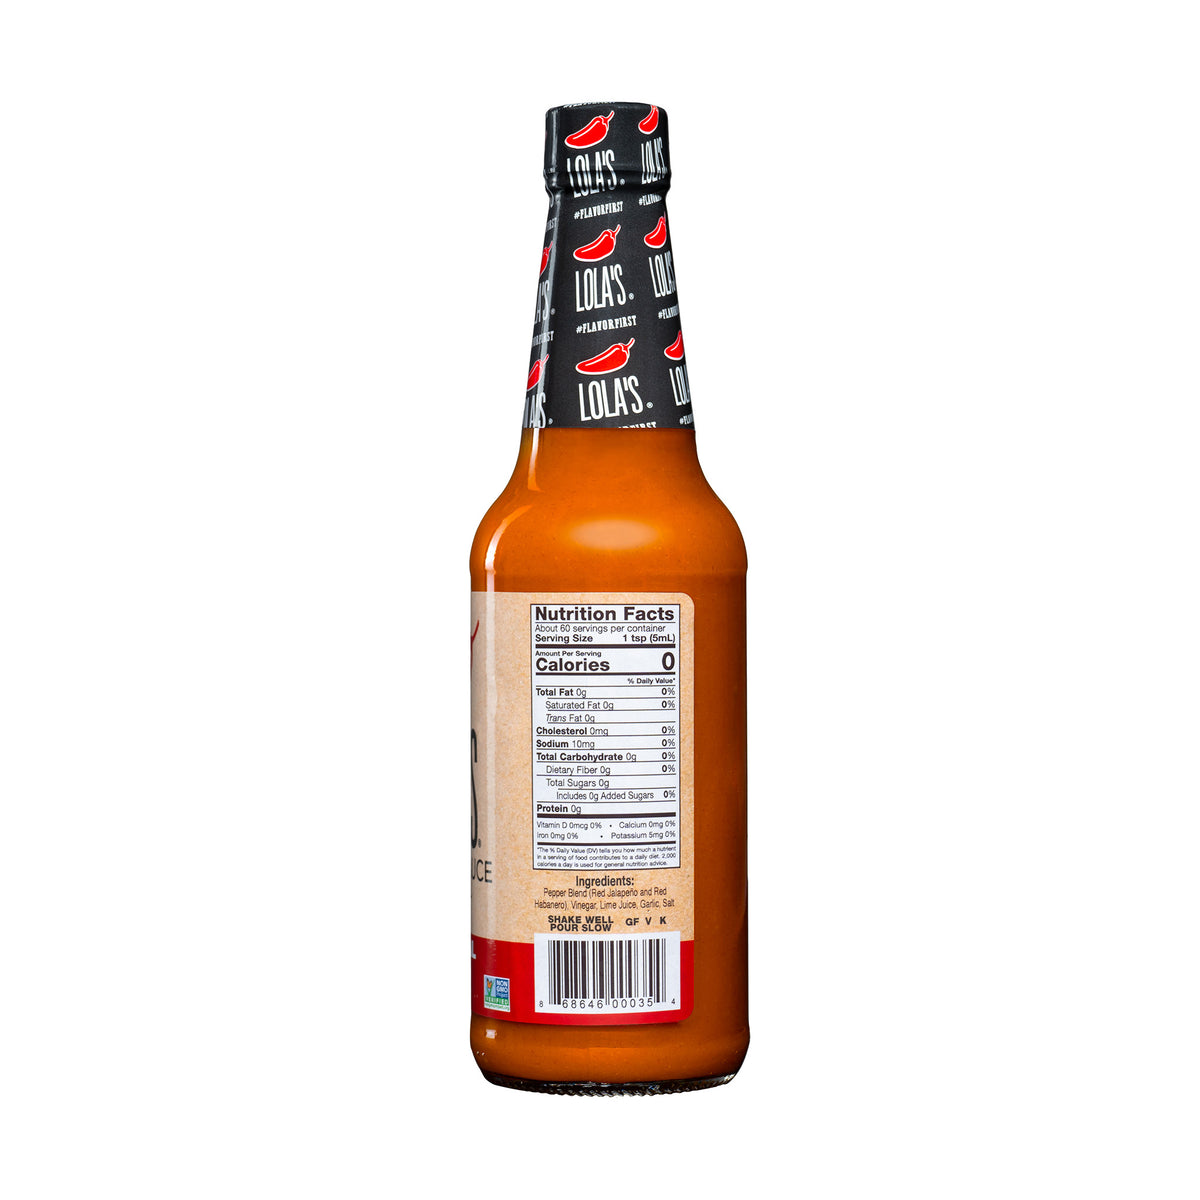 Lola's Original Hot Sauce (10 oz.) - A bottle of all-natural, plant-based hot sauce with a nutrition label and logo close-ups.